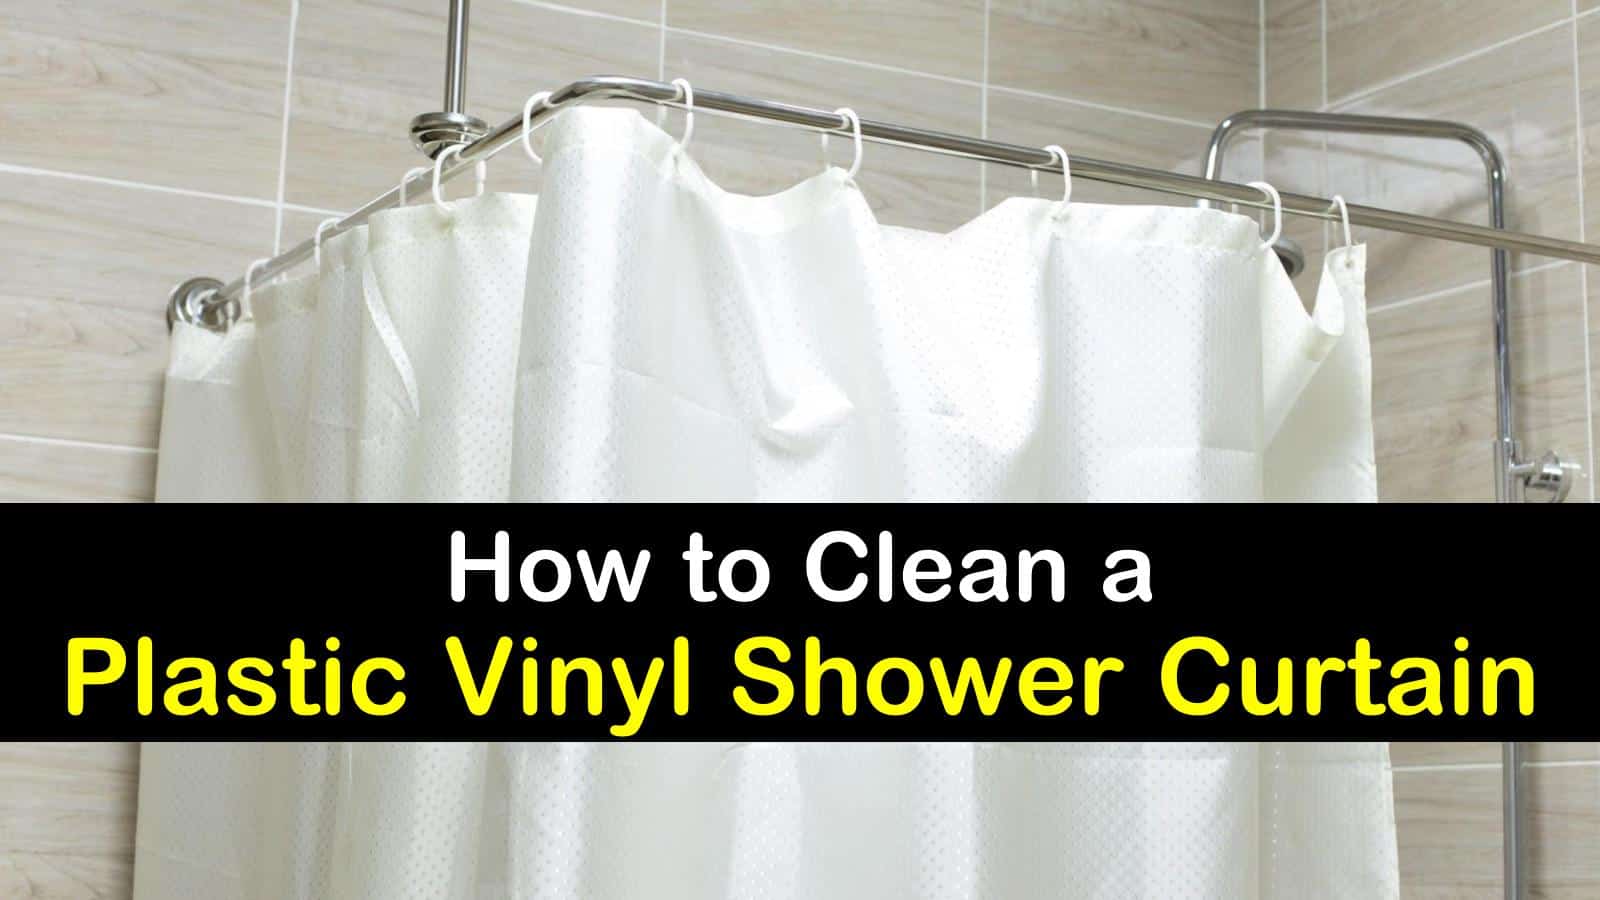 5 Excellent Ways To Clean A Shower Curtain, How Do You Clean A Fabric Shower Curtain Liner